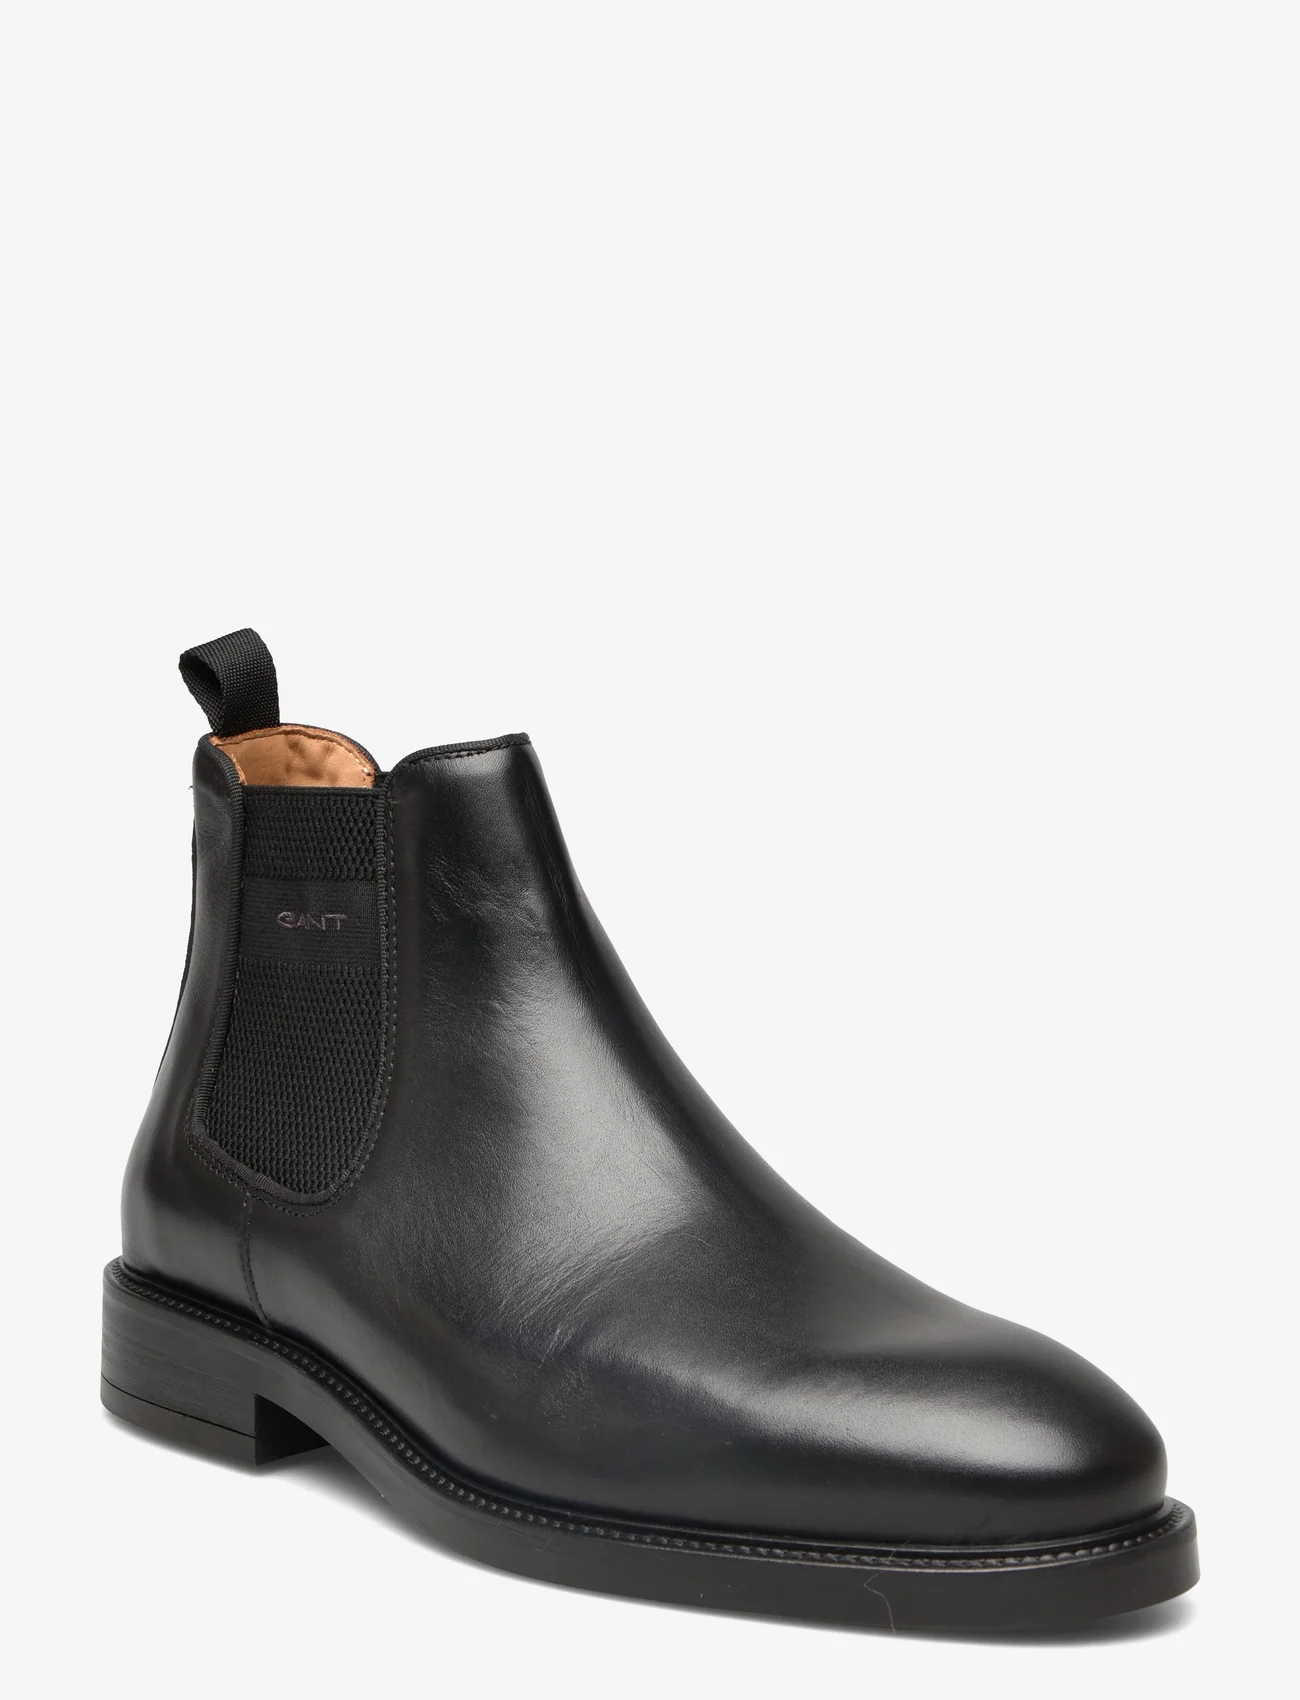 GANT - Flairville Chelsea Boot - birthday gifts - black - 0